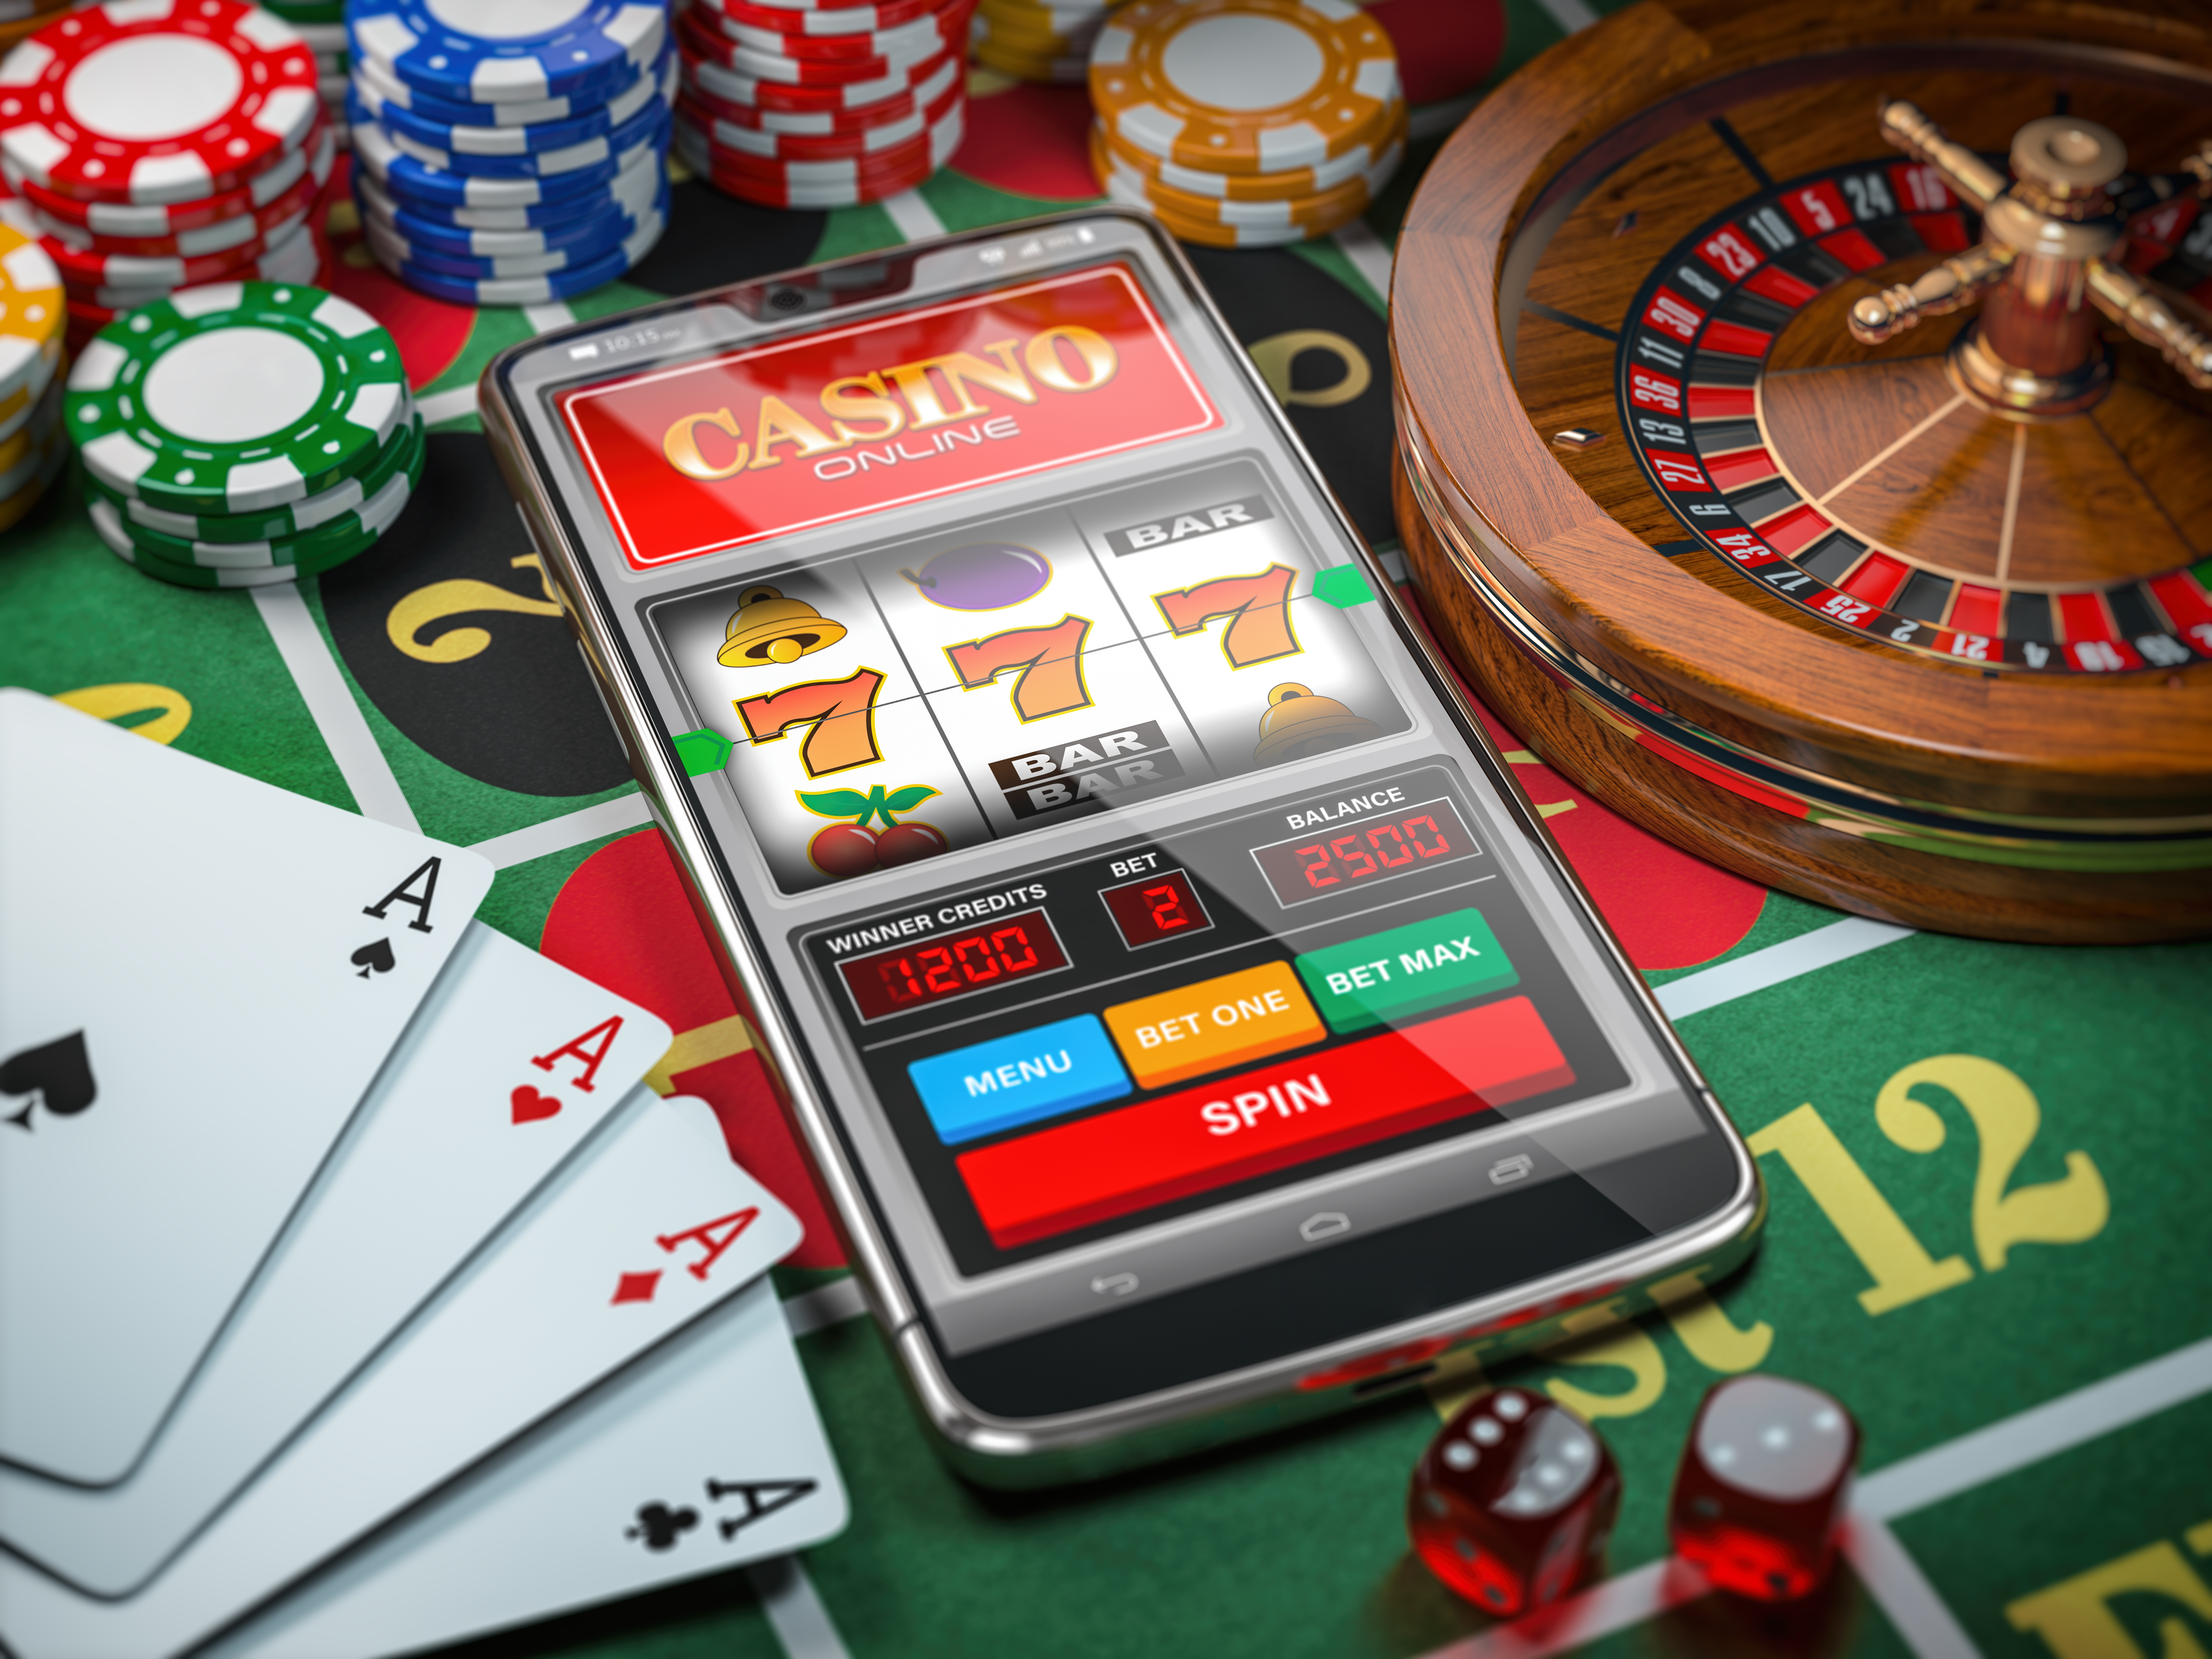 online casino games and Culture: Exploring Global Influences